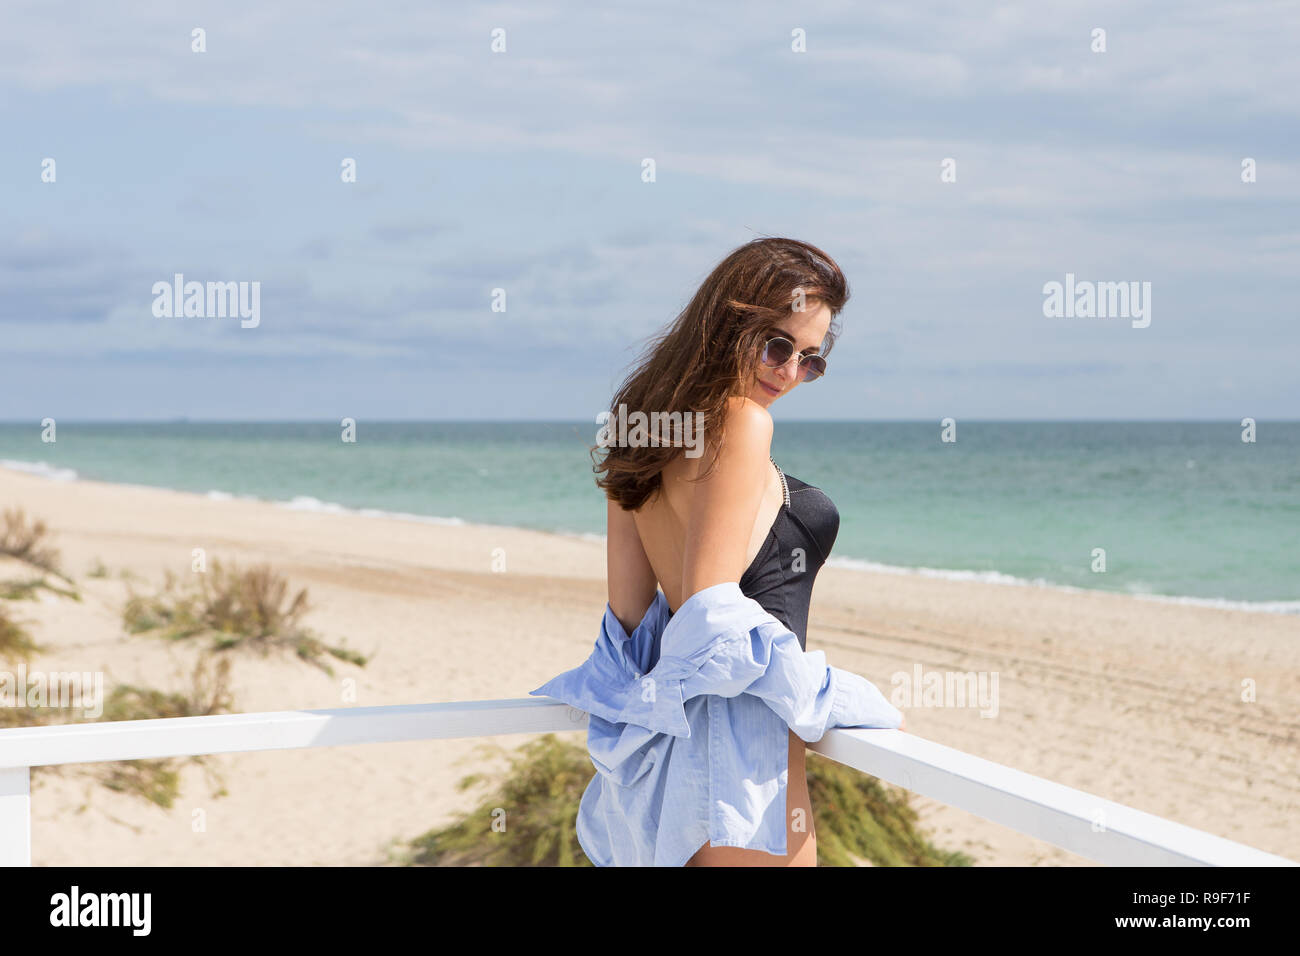 Portrait of a young sexy girl standing on a background of beach, sand and sea. She wearing black swimwear, blue shirt and sunglasses Stock Photo